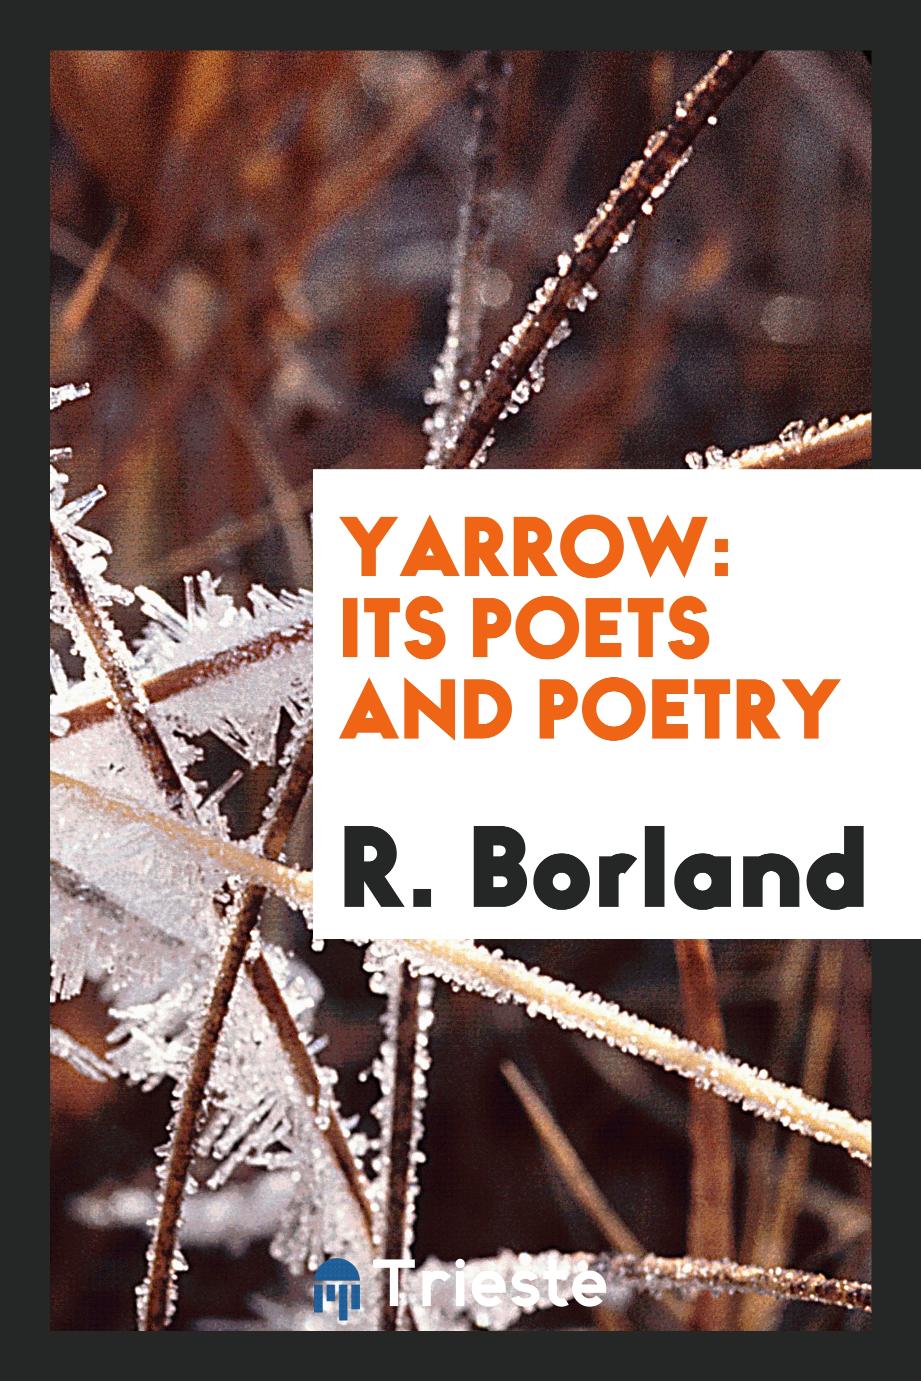 Yarrow: Its Poets and Poetry